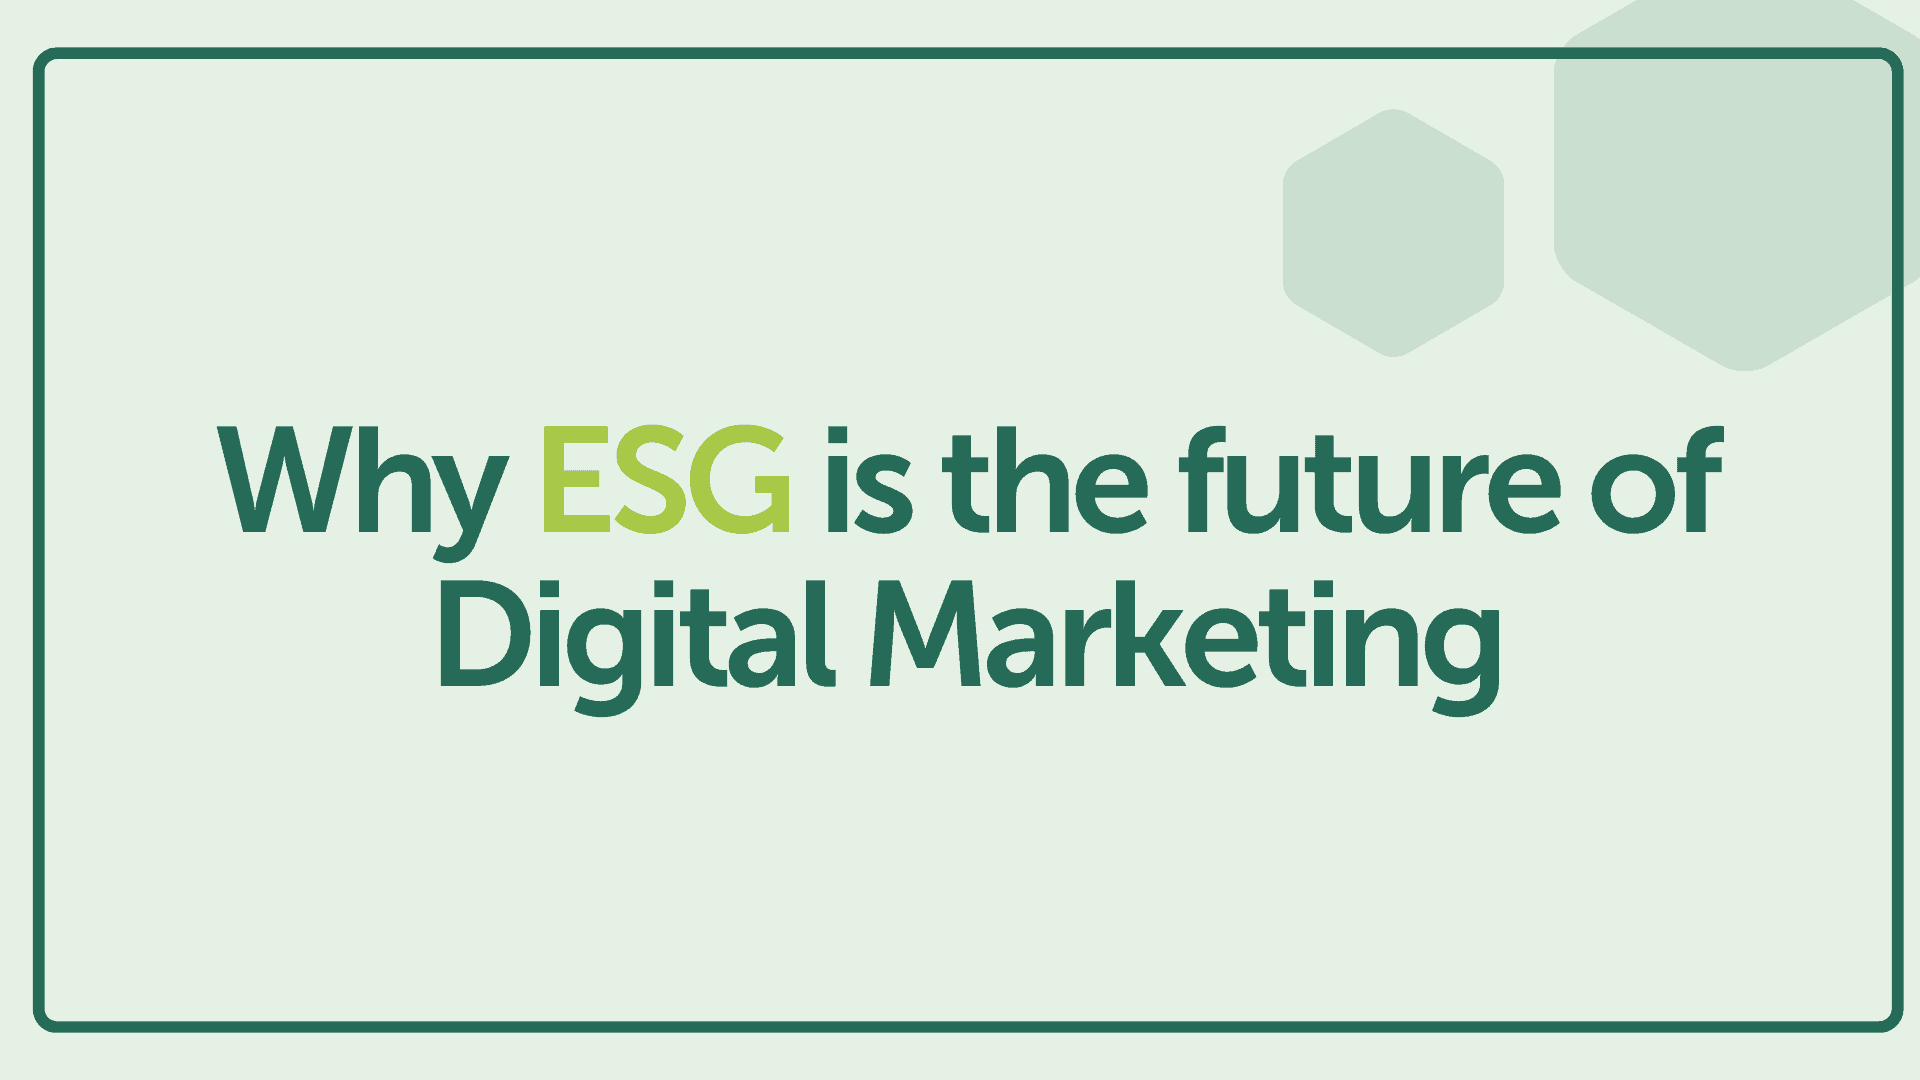 Why ESG is the future of Digital Marketing